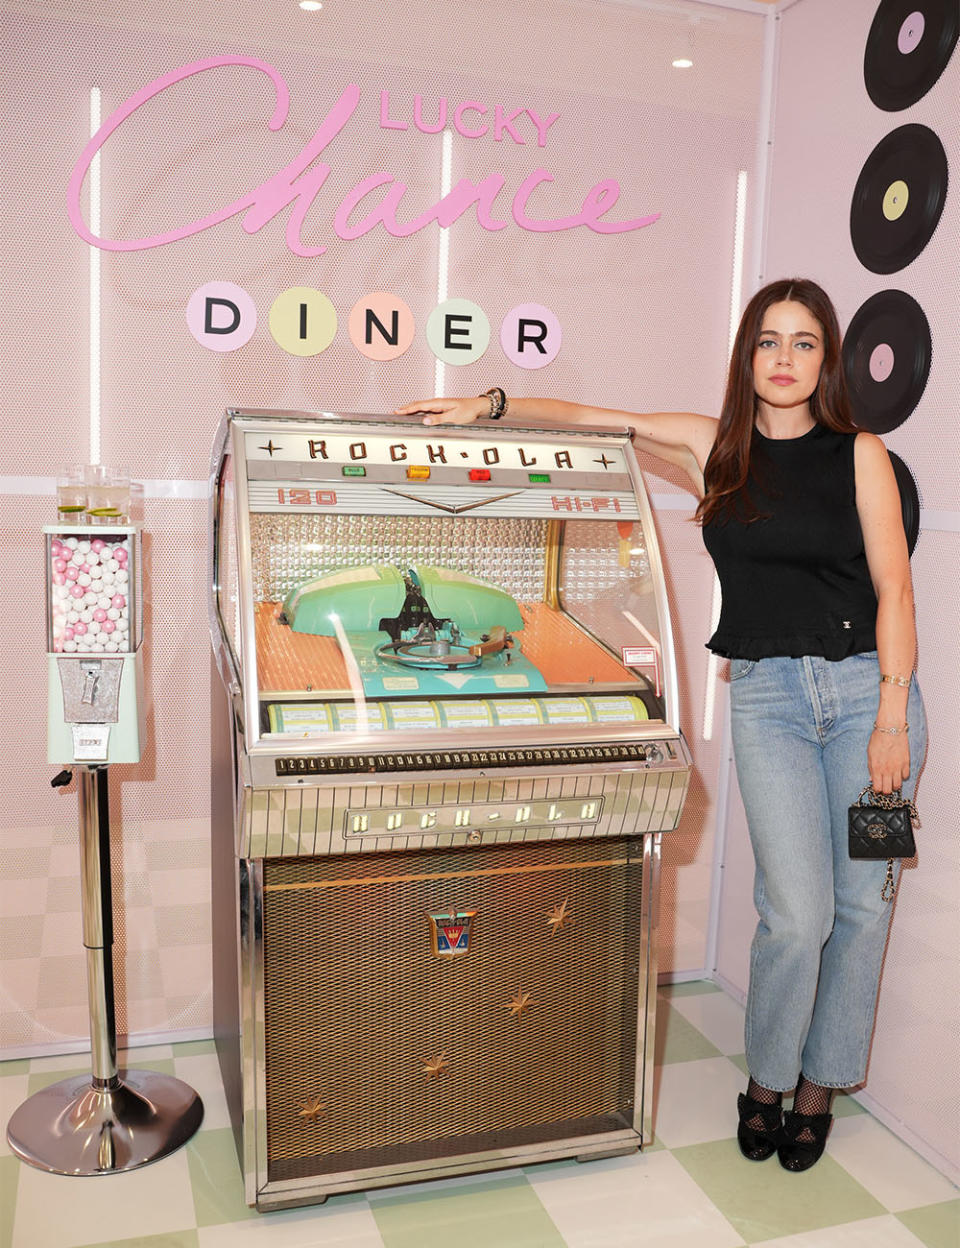 Molly Gordon, wearing CHANEL, attends the CHANEL party to celebrate the debut of the Lucky Chance Diner on September 06, 2023 in Brooklyn, New York.